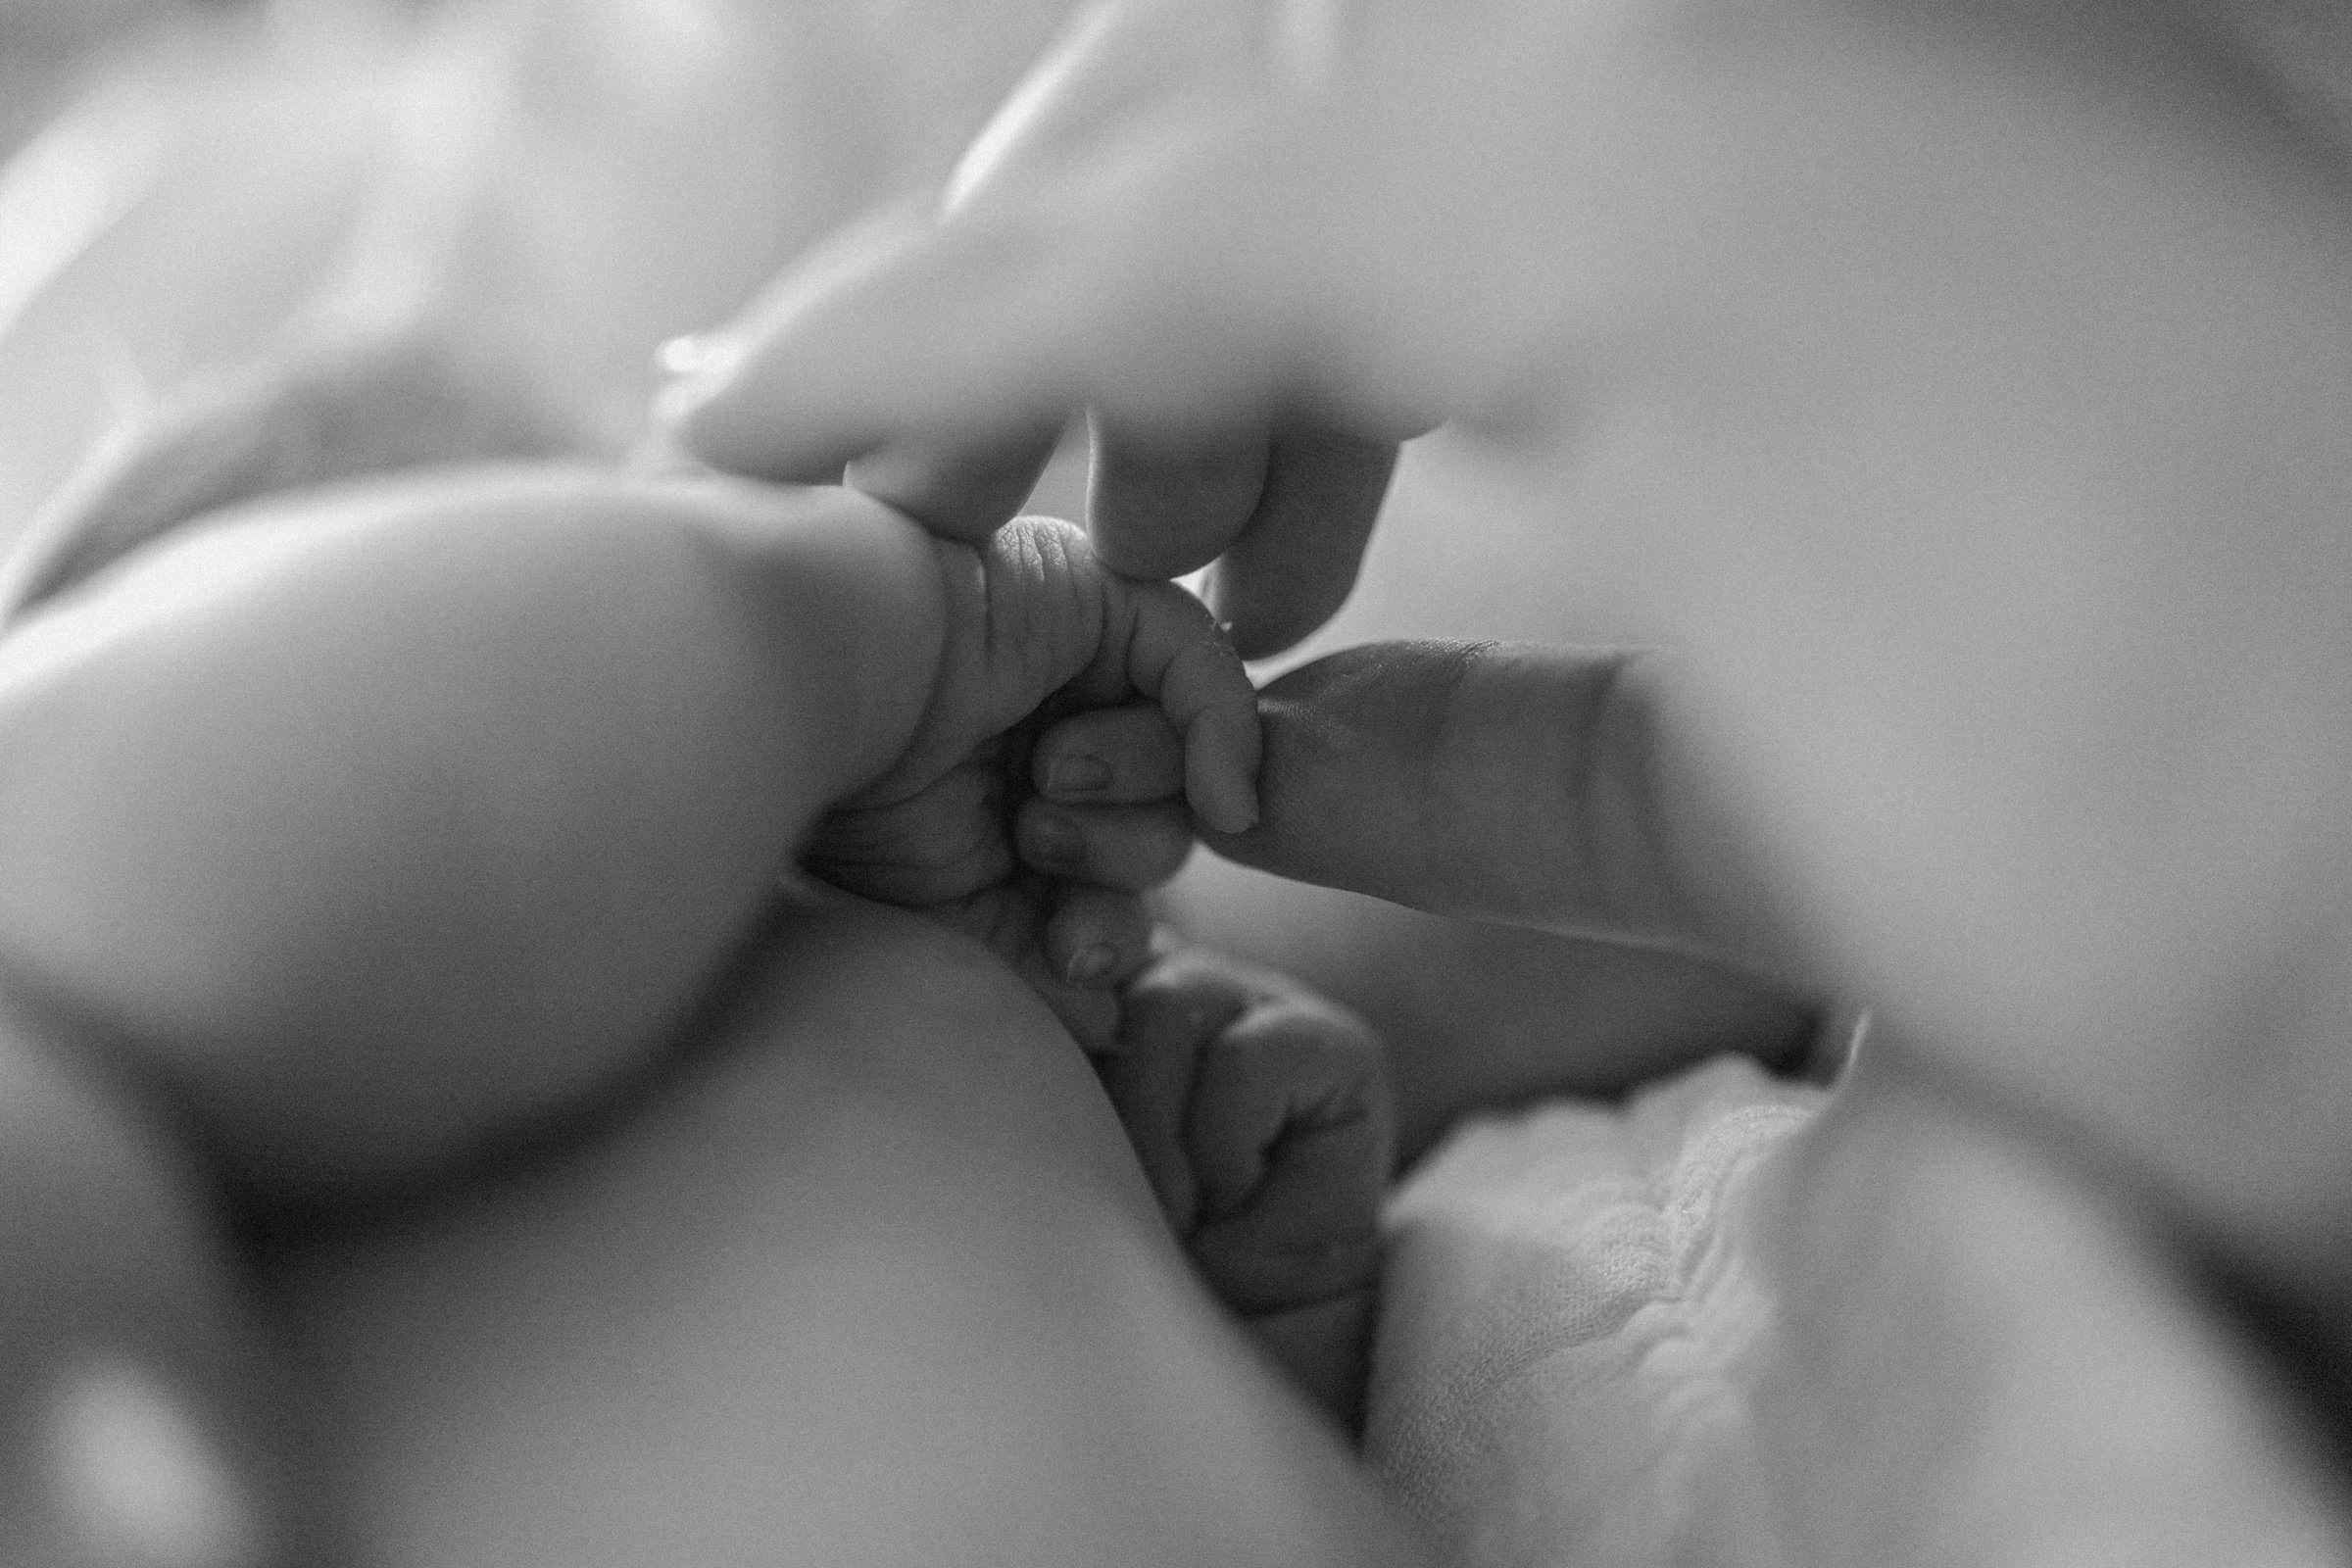 Mother grasping babies hand in black and white image during a Eugene Oregon newborn session